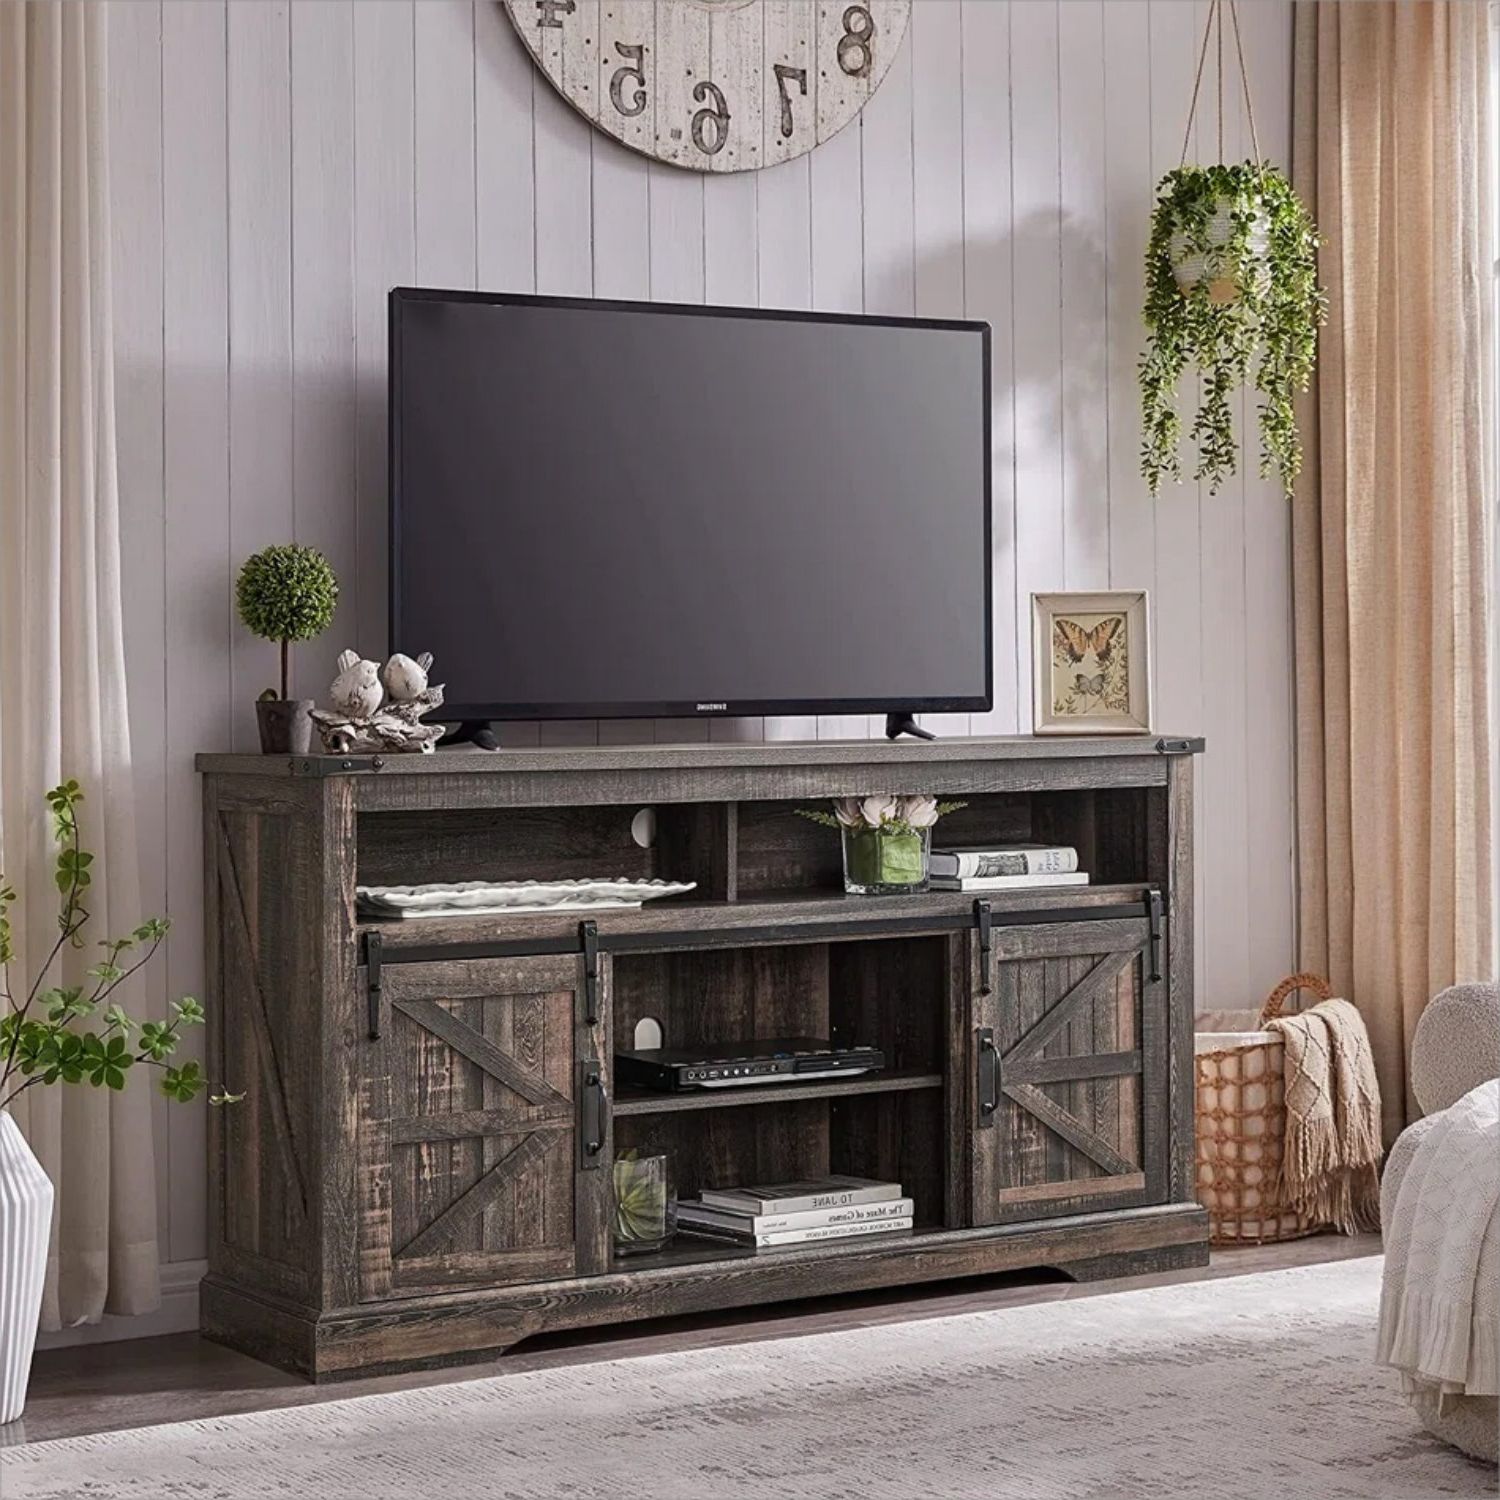 Gracie Oaks Clairessa Farmhouse Tv Stand For 65+ Inch Tv For Living Room,  With Sliding Barn Door & Reviews | Wayfair Throughout Farmhouse Stands For Tvs (Gallery 15 of 20)